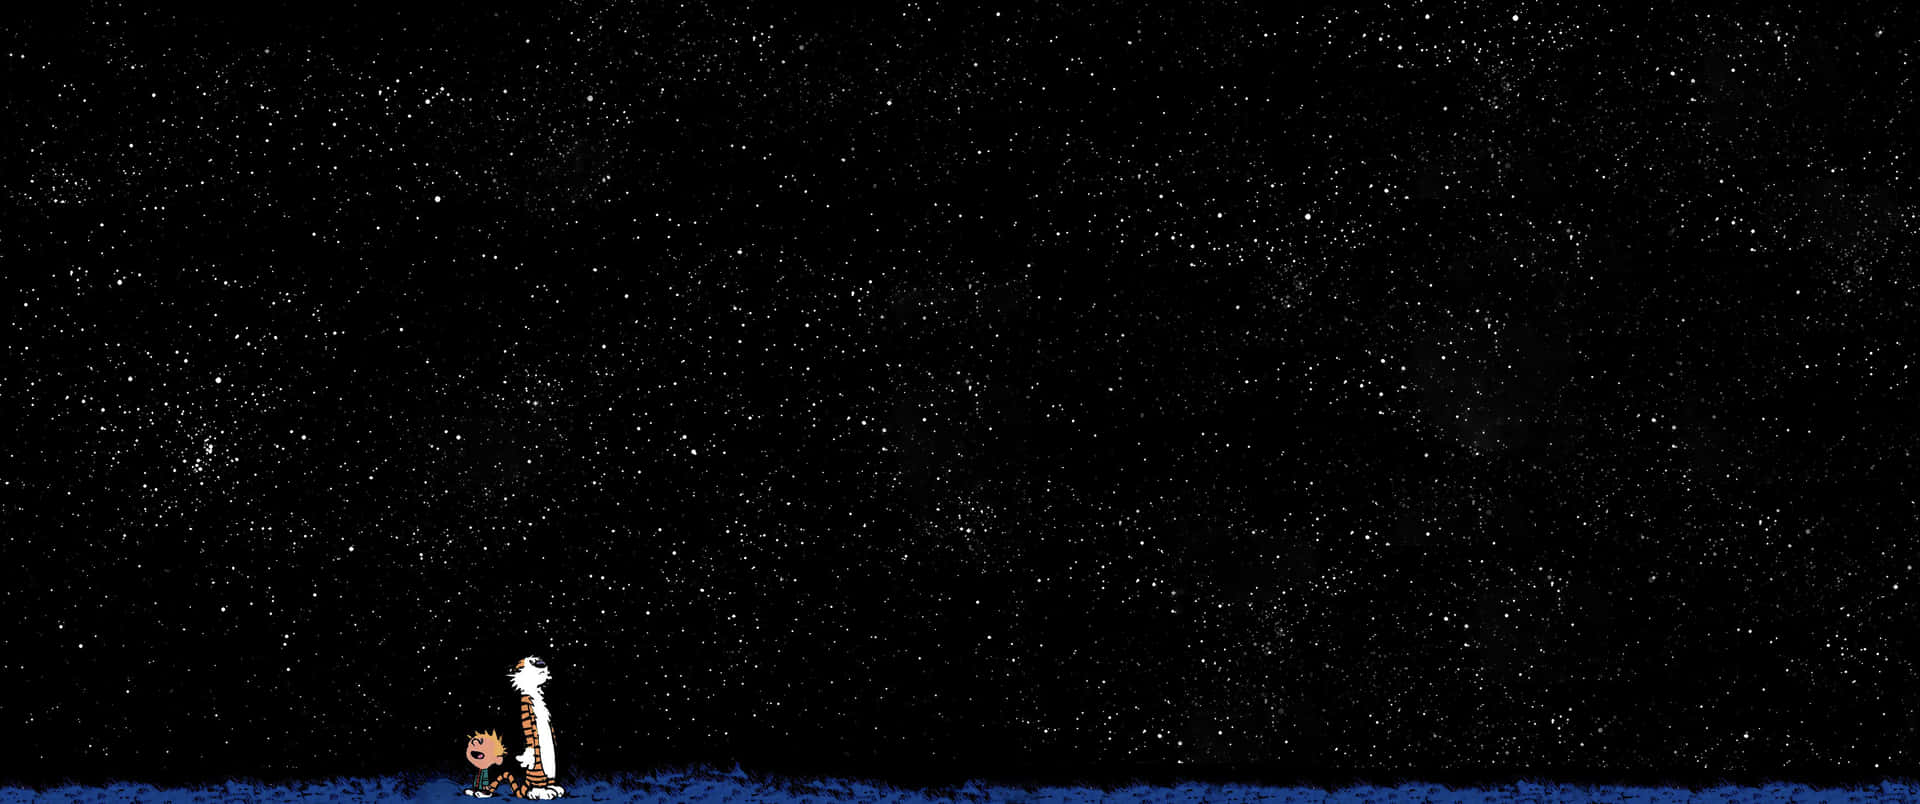 3440x1440 Space With Calvin And Hobbes Wallpaper